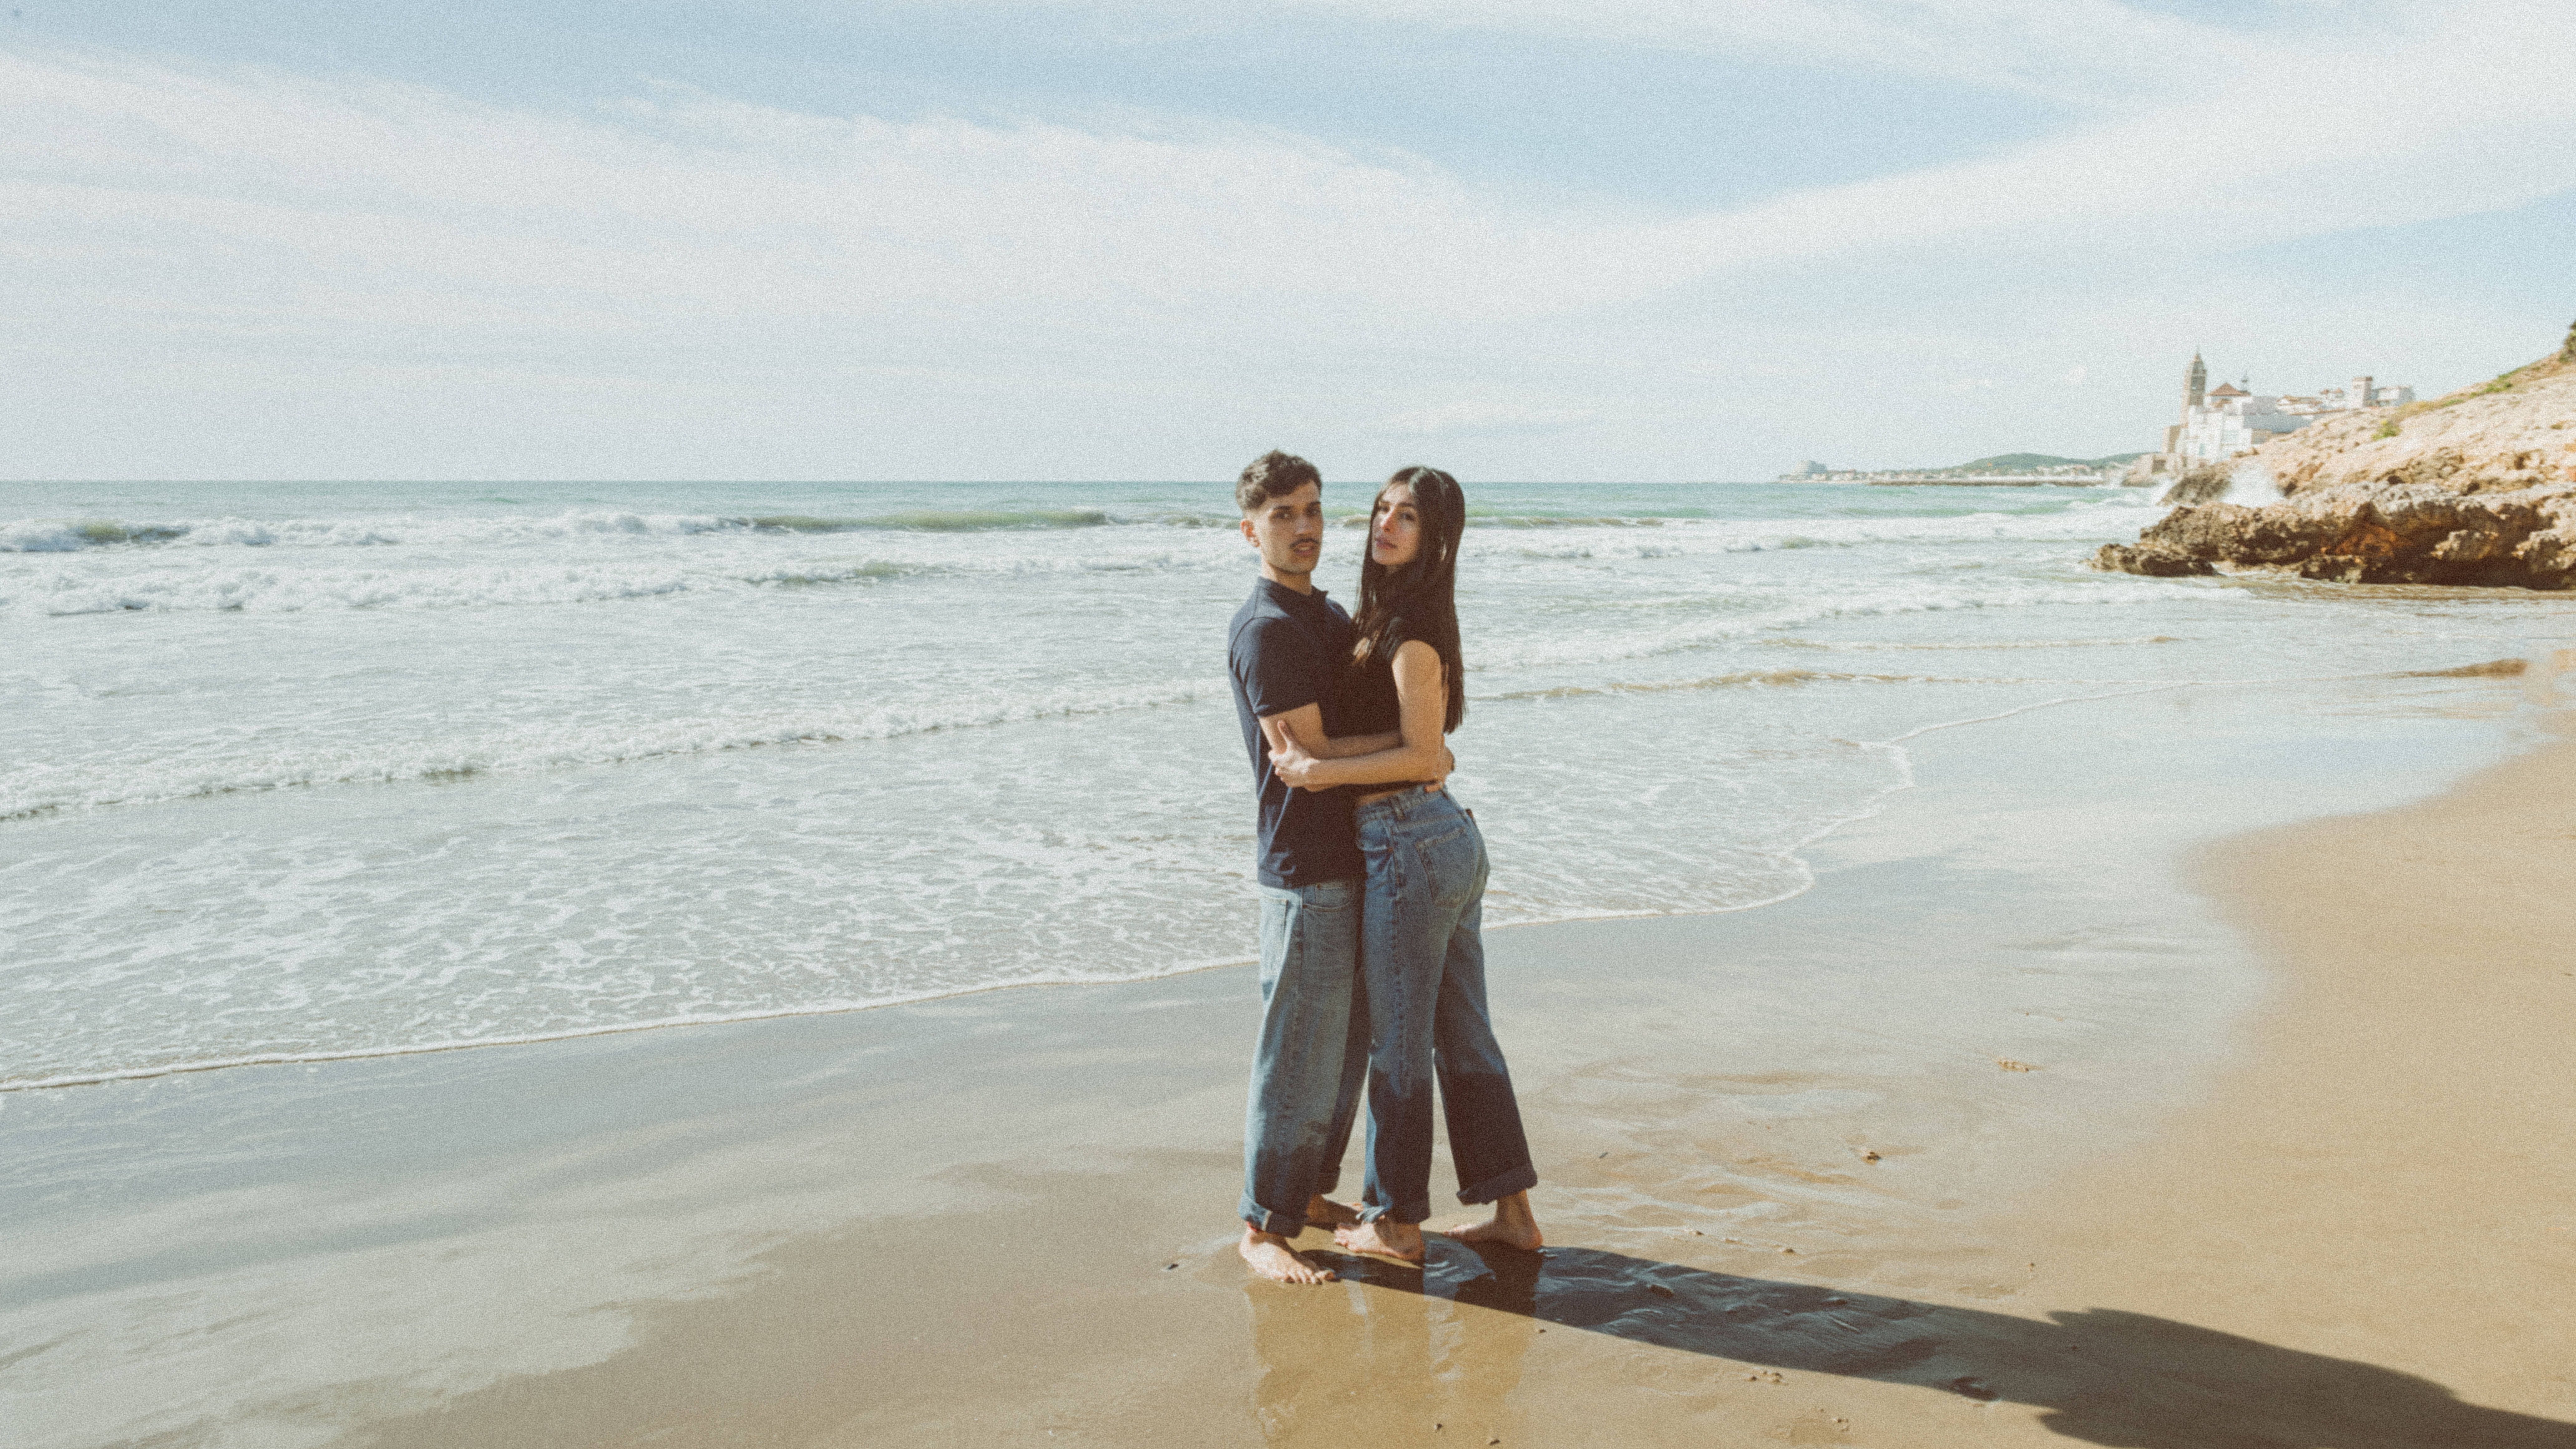 Sunlit Sands: Artistic Couple Photography in Sitges